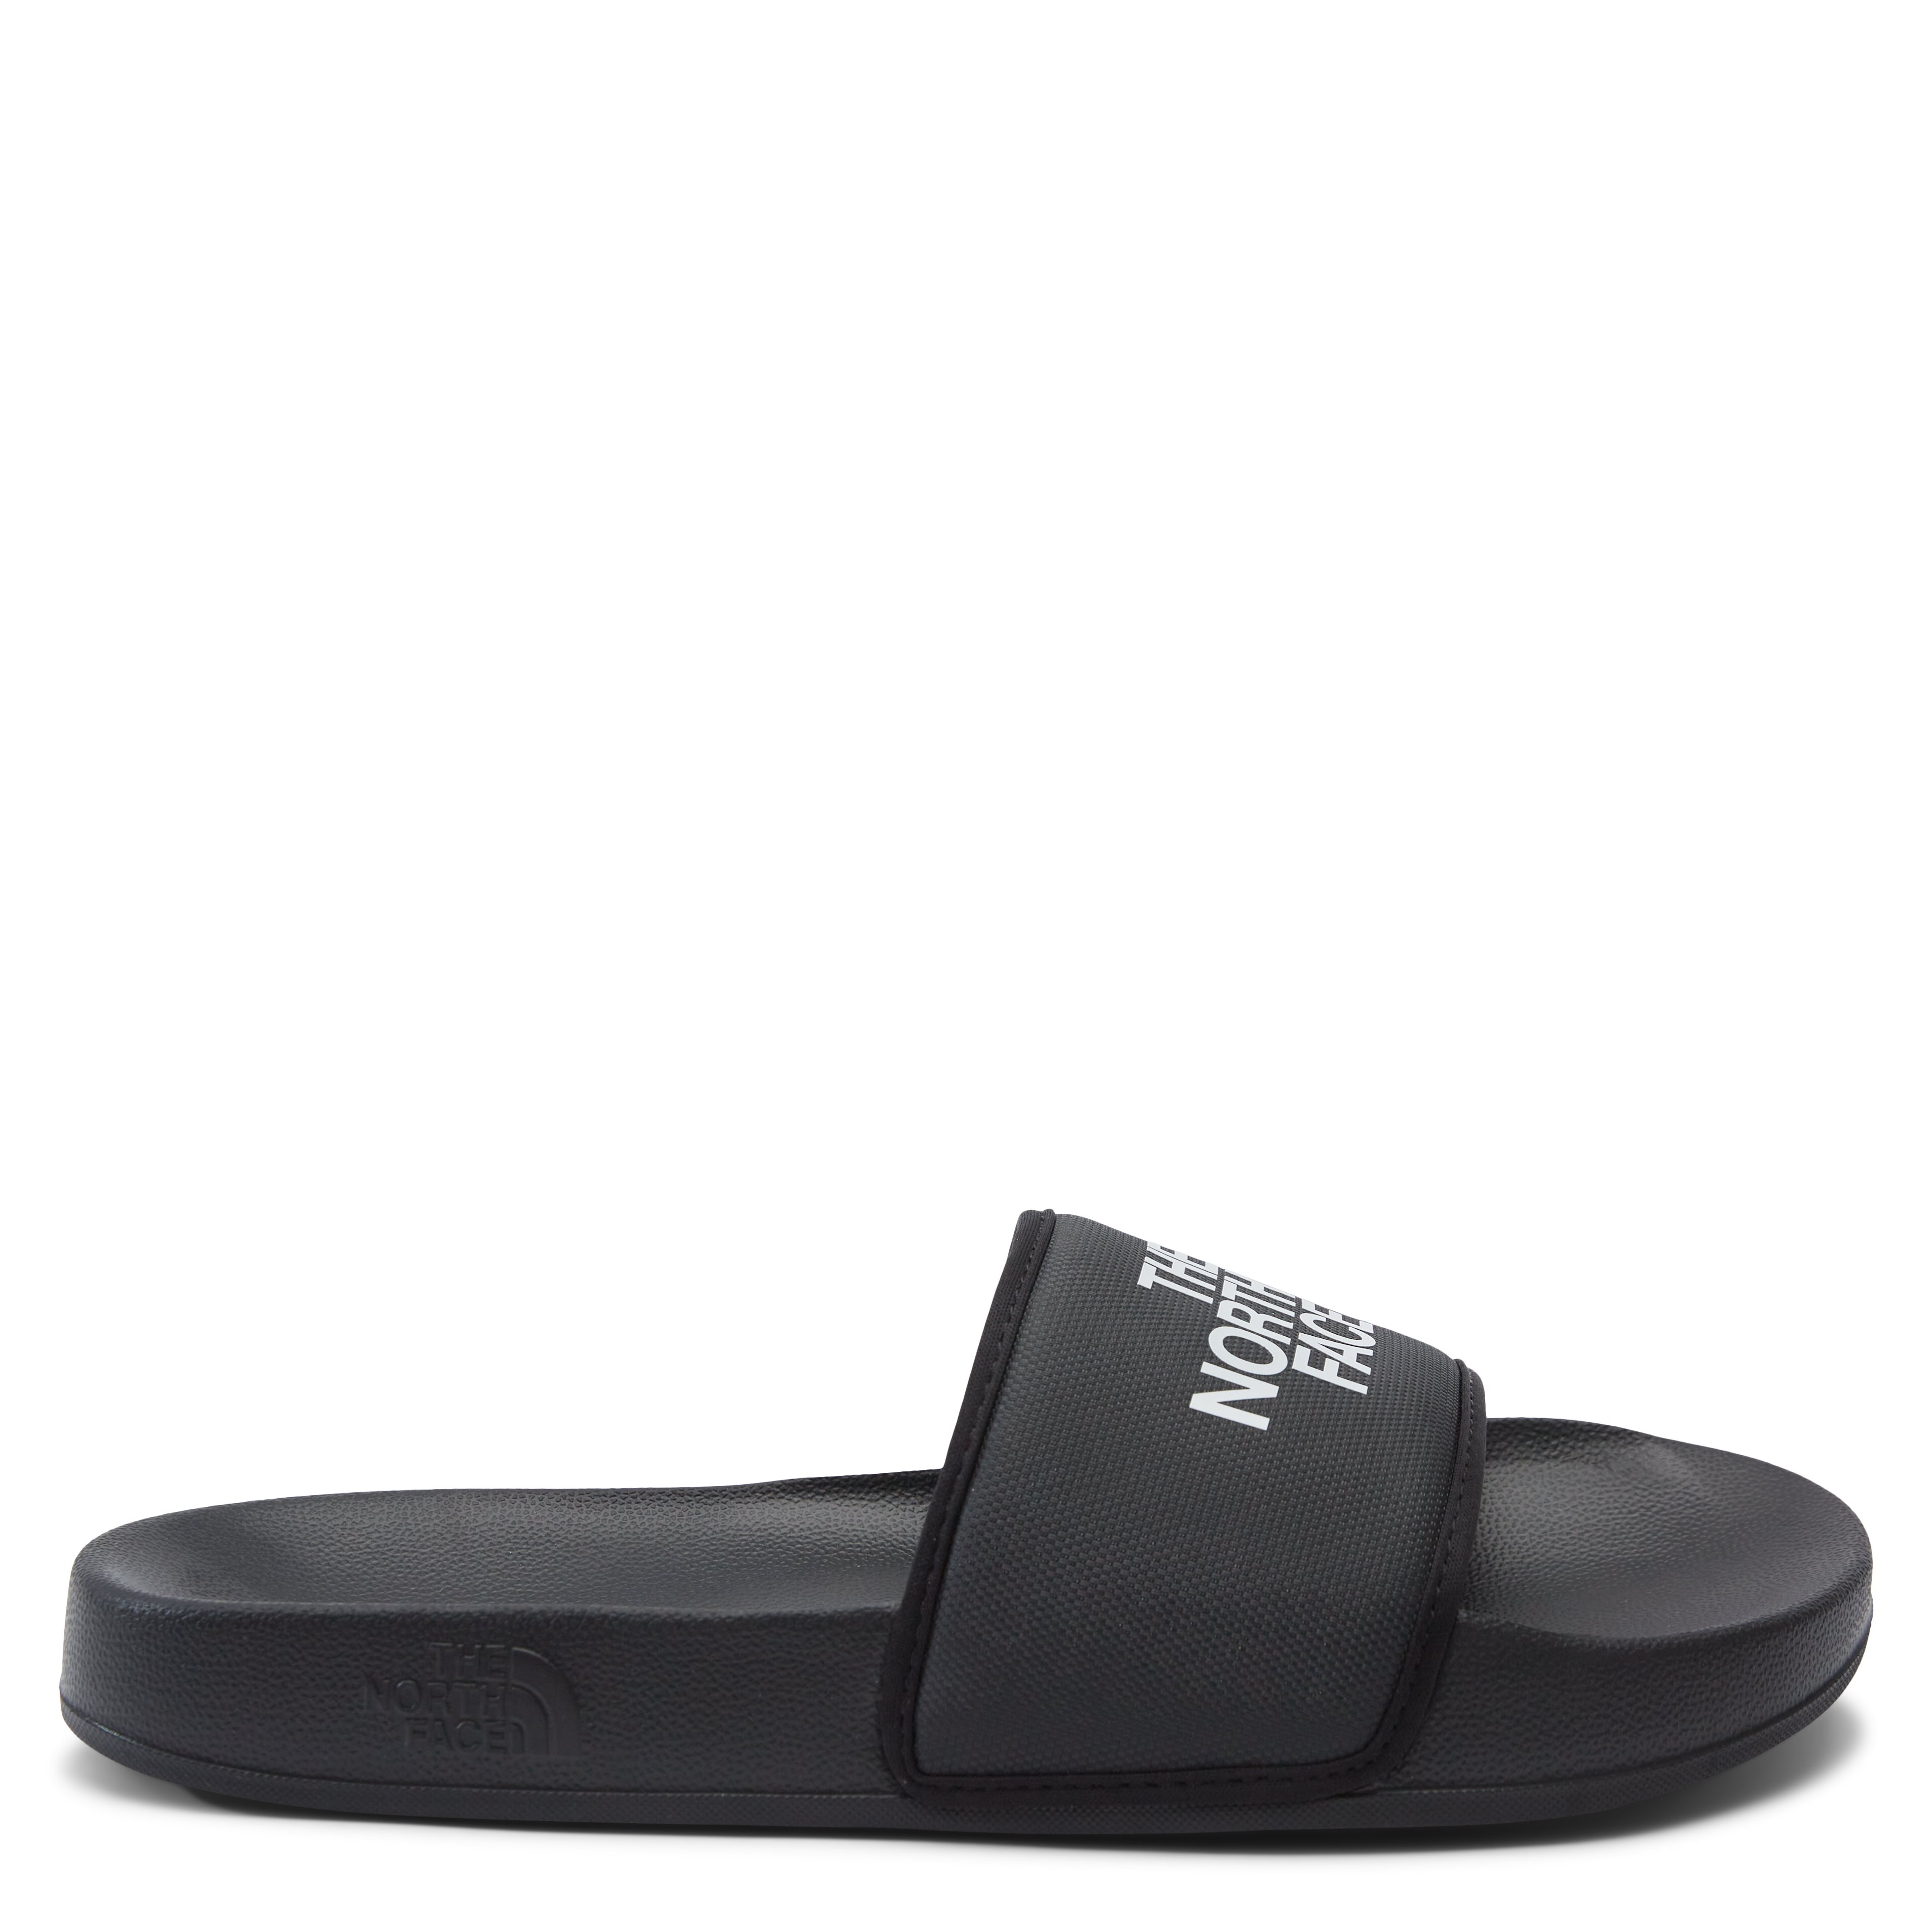 The North Face Shoes BASE CAMP SLIDE III Black